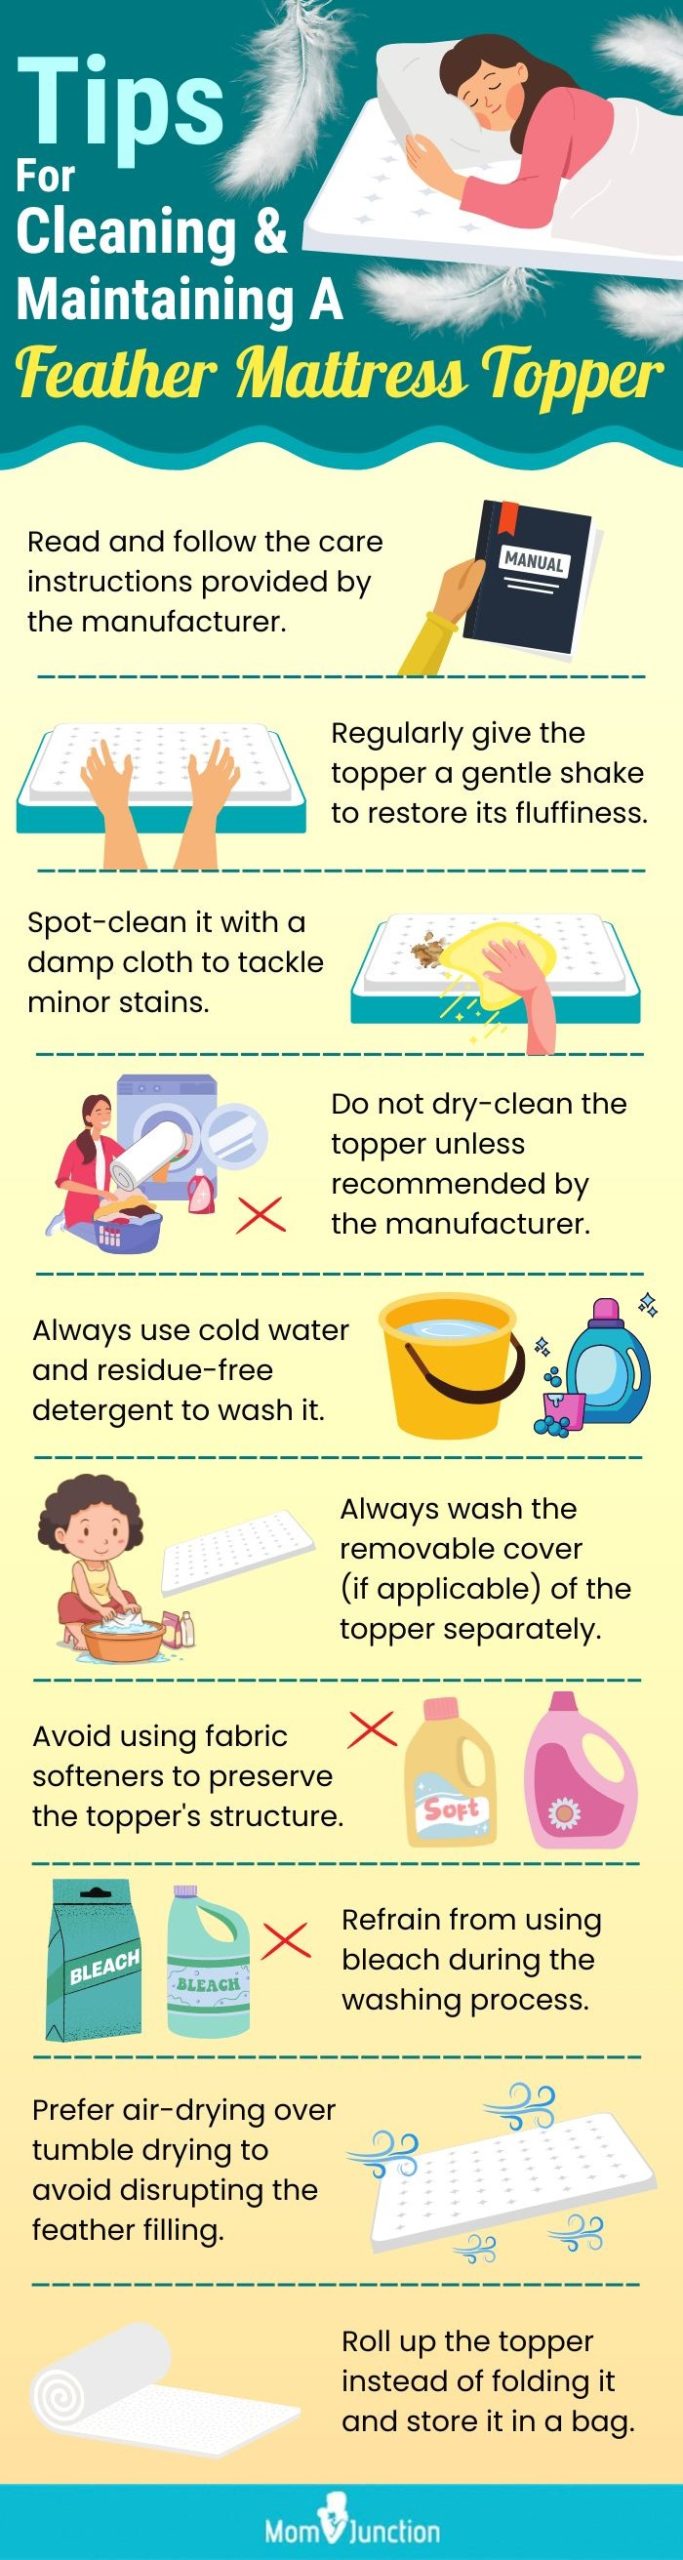 Tips For Cleaning And Maintaining A Feather Mattress Topper (infographic)